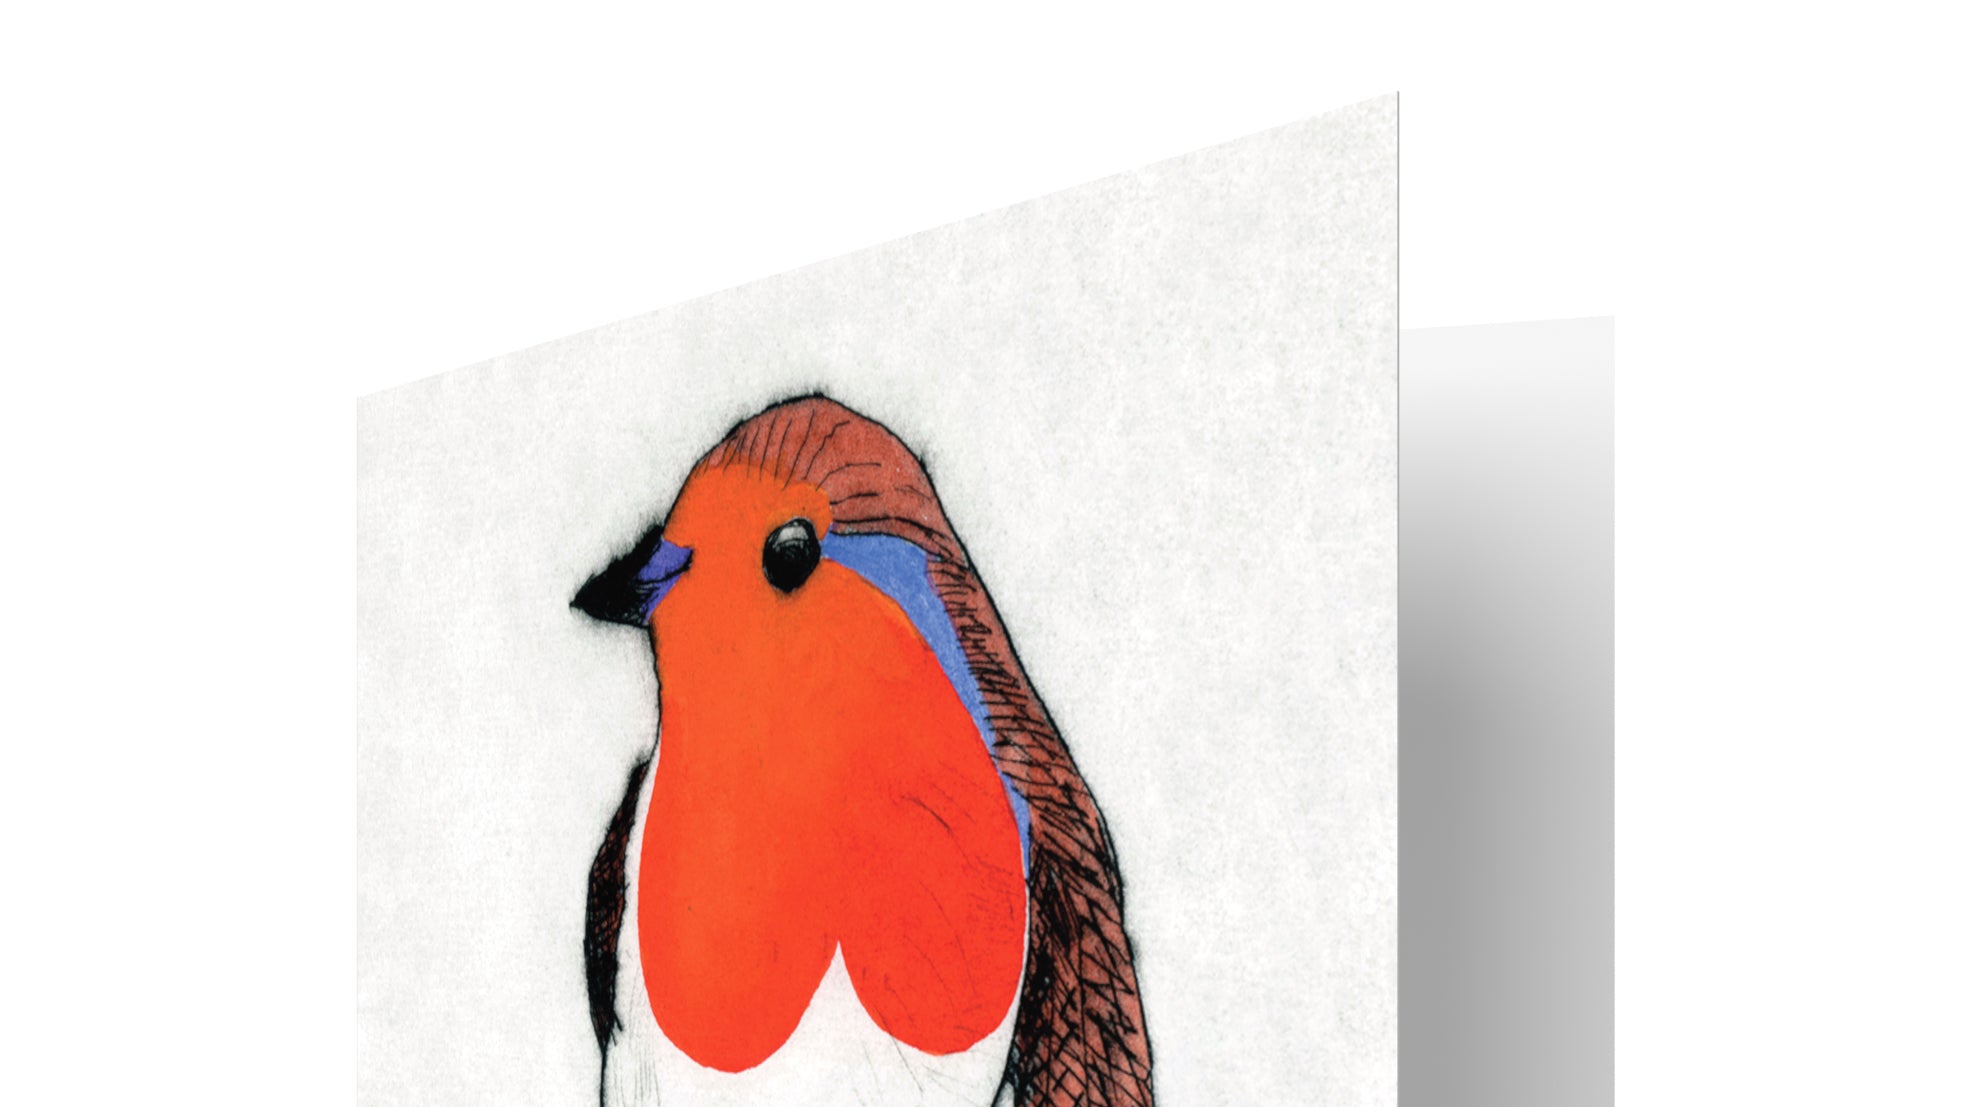 'Dapper Robin' by Richard Spare has been published as the World's First Plastic-Negative Christmas Card